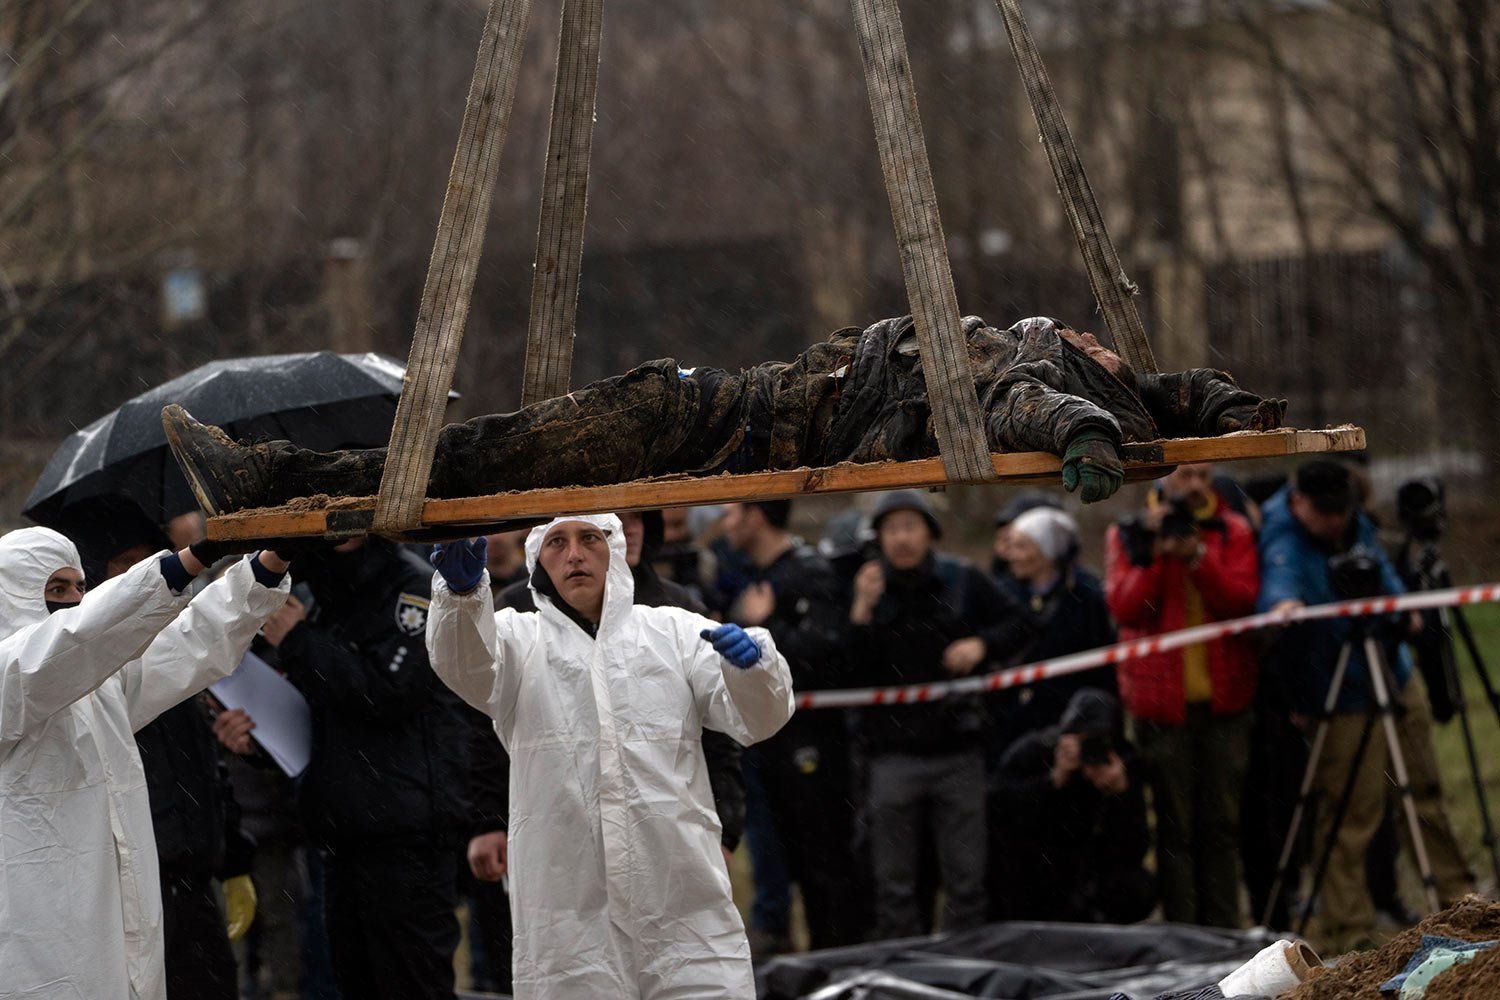  Forensic workers carry the corpse of a civilian killed during the war against Russia after collecting it from a mass grave in Kyiv, Ukraine, Friday, April 8, 2022. (AP Photo/Rodrigo Abd) 